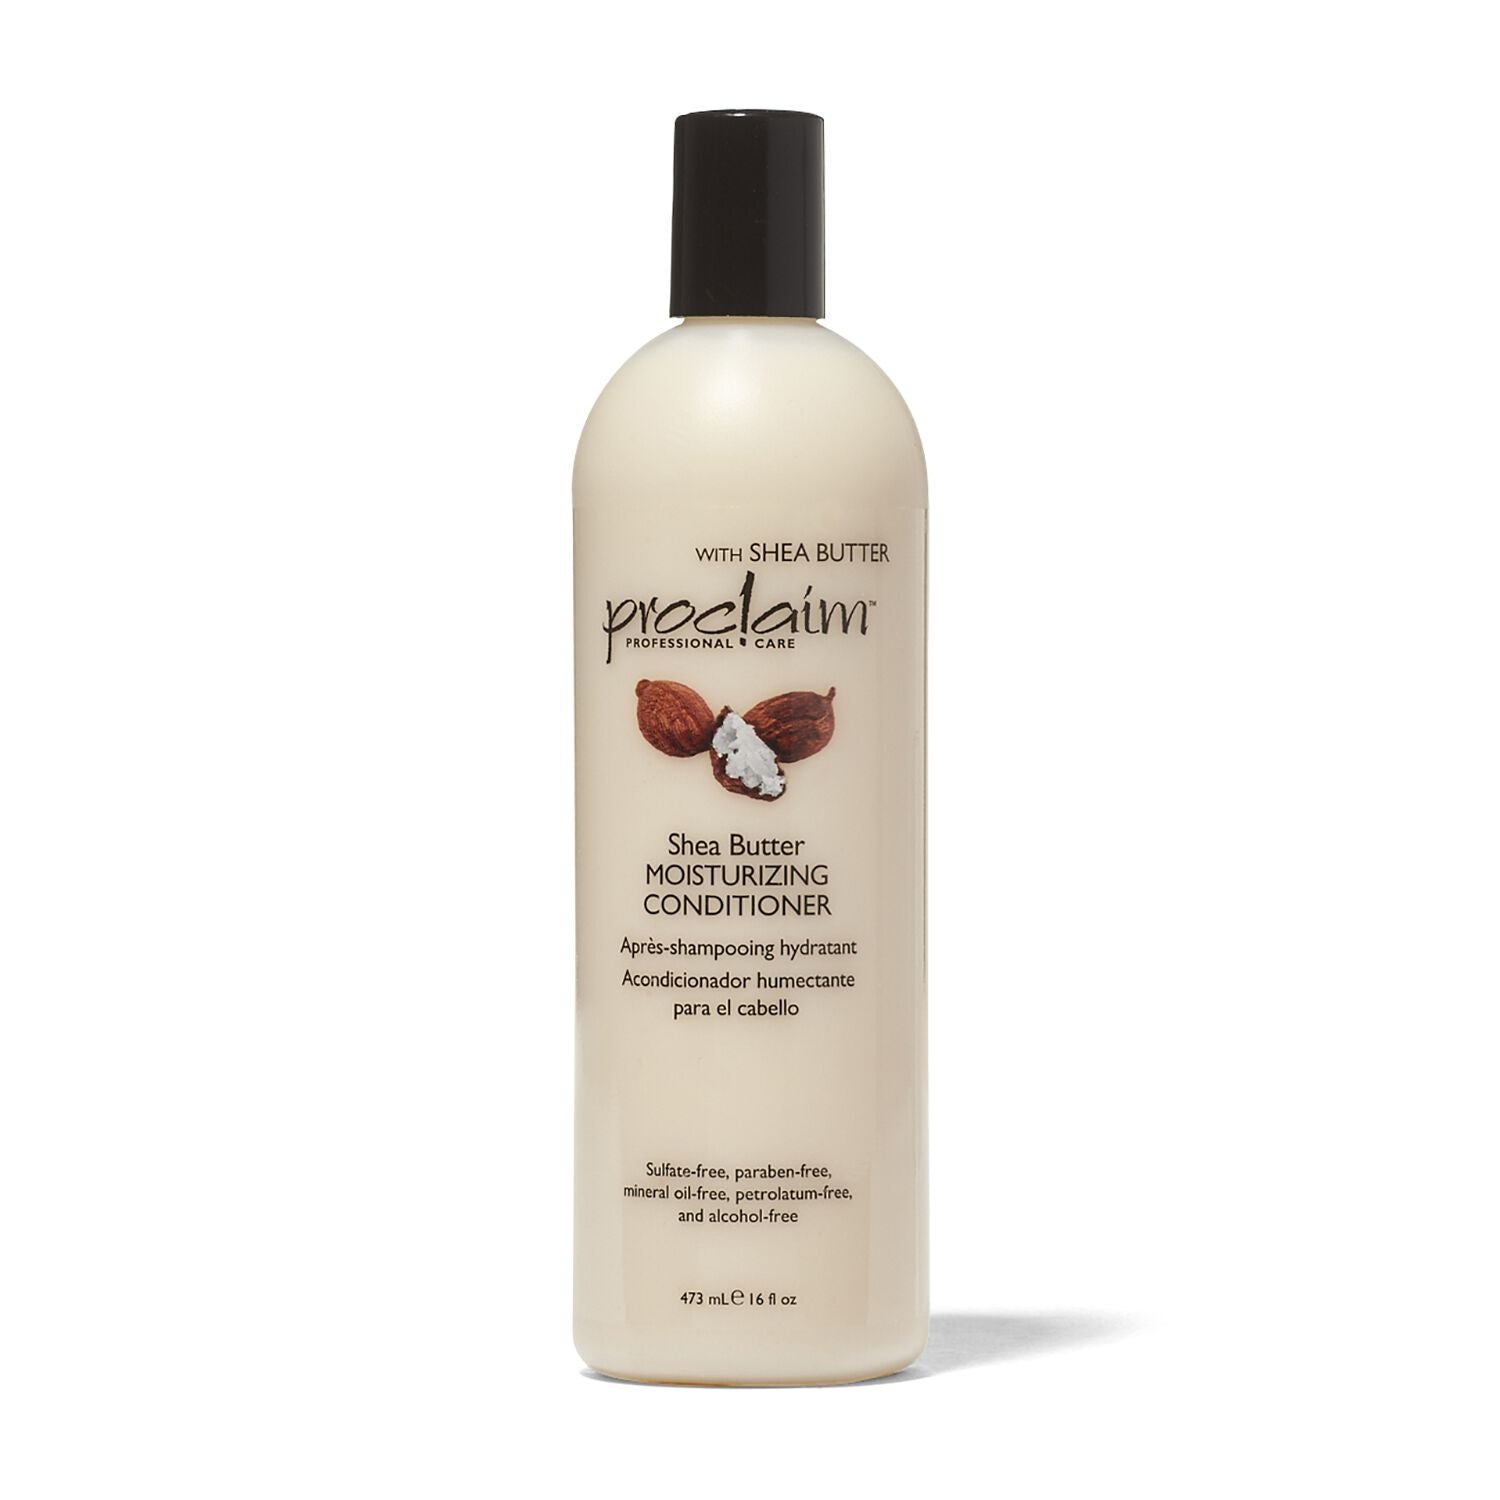 Shea Butter  by   Proclaim Shea Butter Moisturizing Conditioner